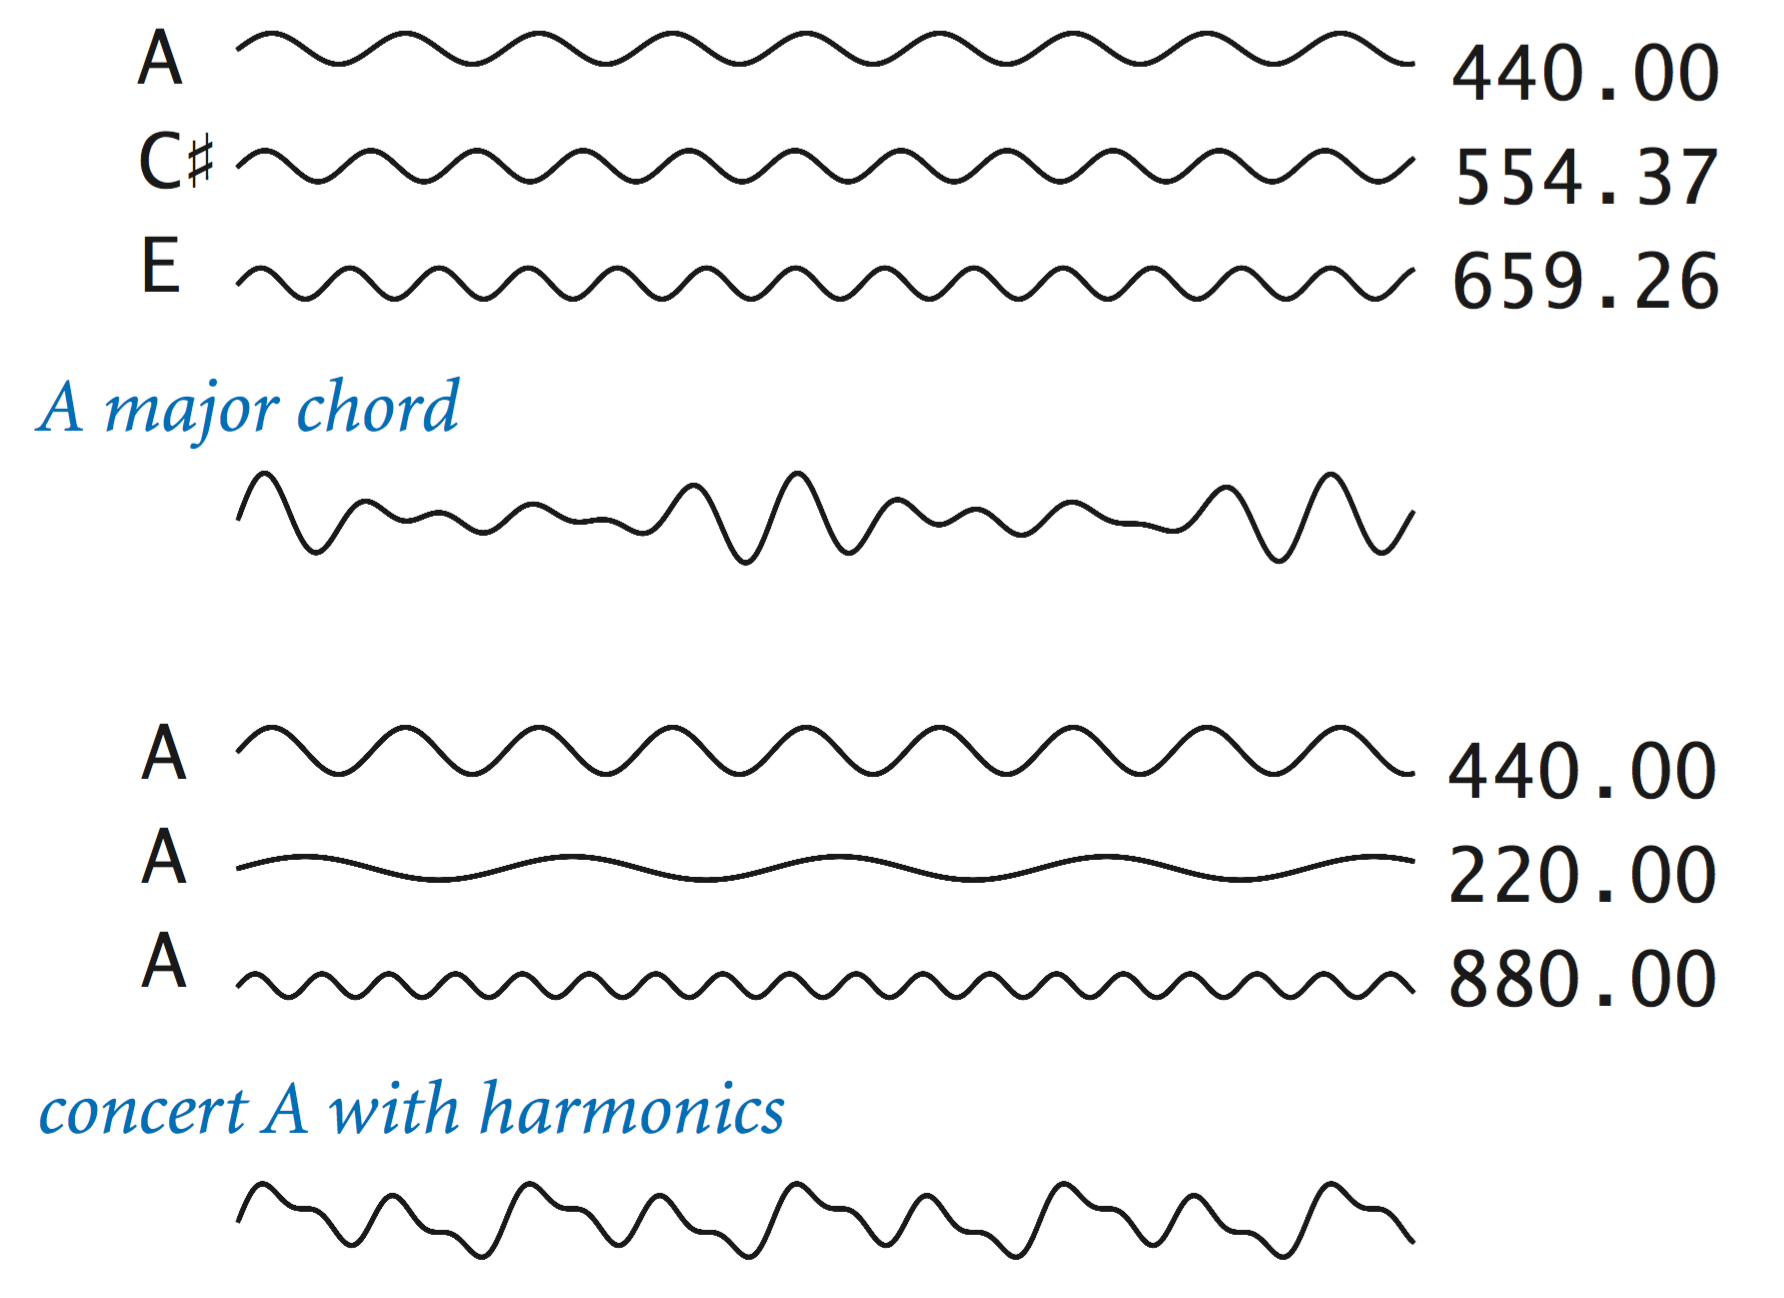 Superposition of sound waves